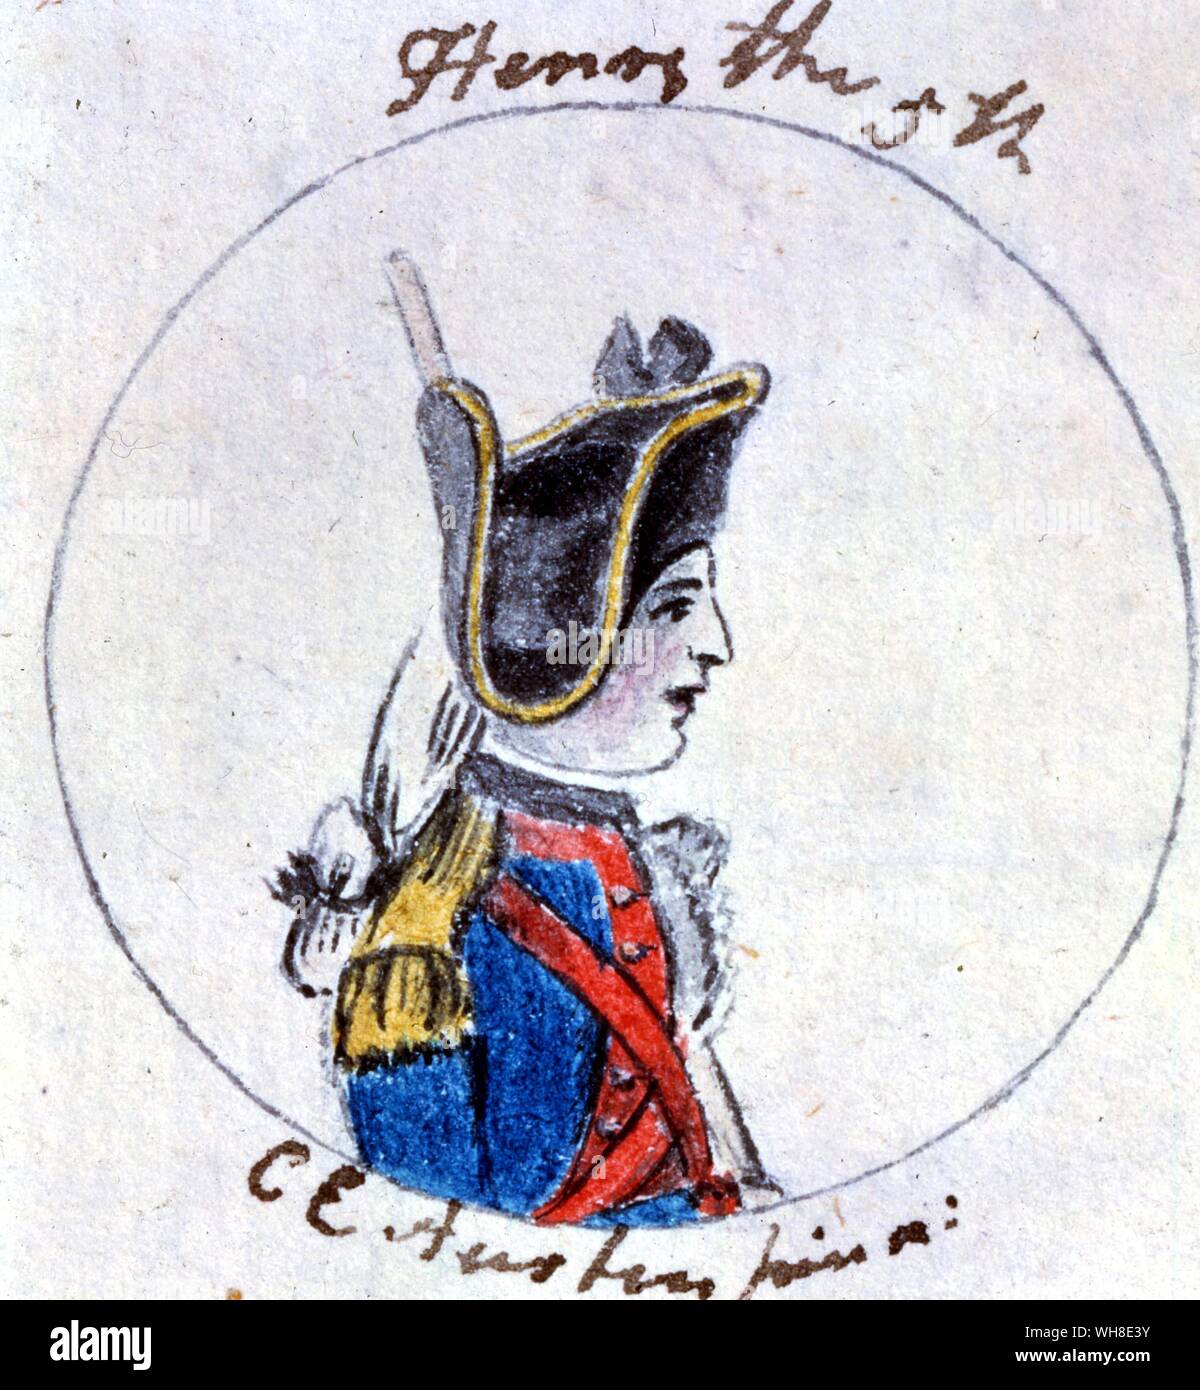 Henry V, (1387-1422), King of England (1413-1422), son of Henry IV by Mary de Bohun. Watercolour sketches by Cassandra Austen: One of six sketches for Jane Austen's History of England, 1790. Cassandra Austen, was the elder sister of Jane Austen (1775-1817), to whom she was very close.. . Stock Photo